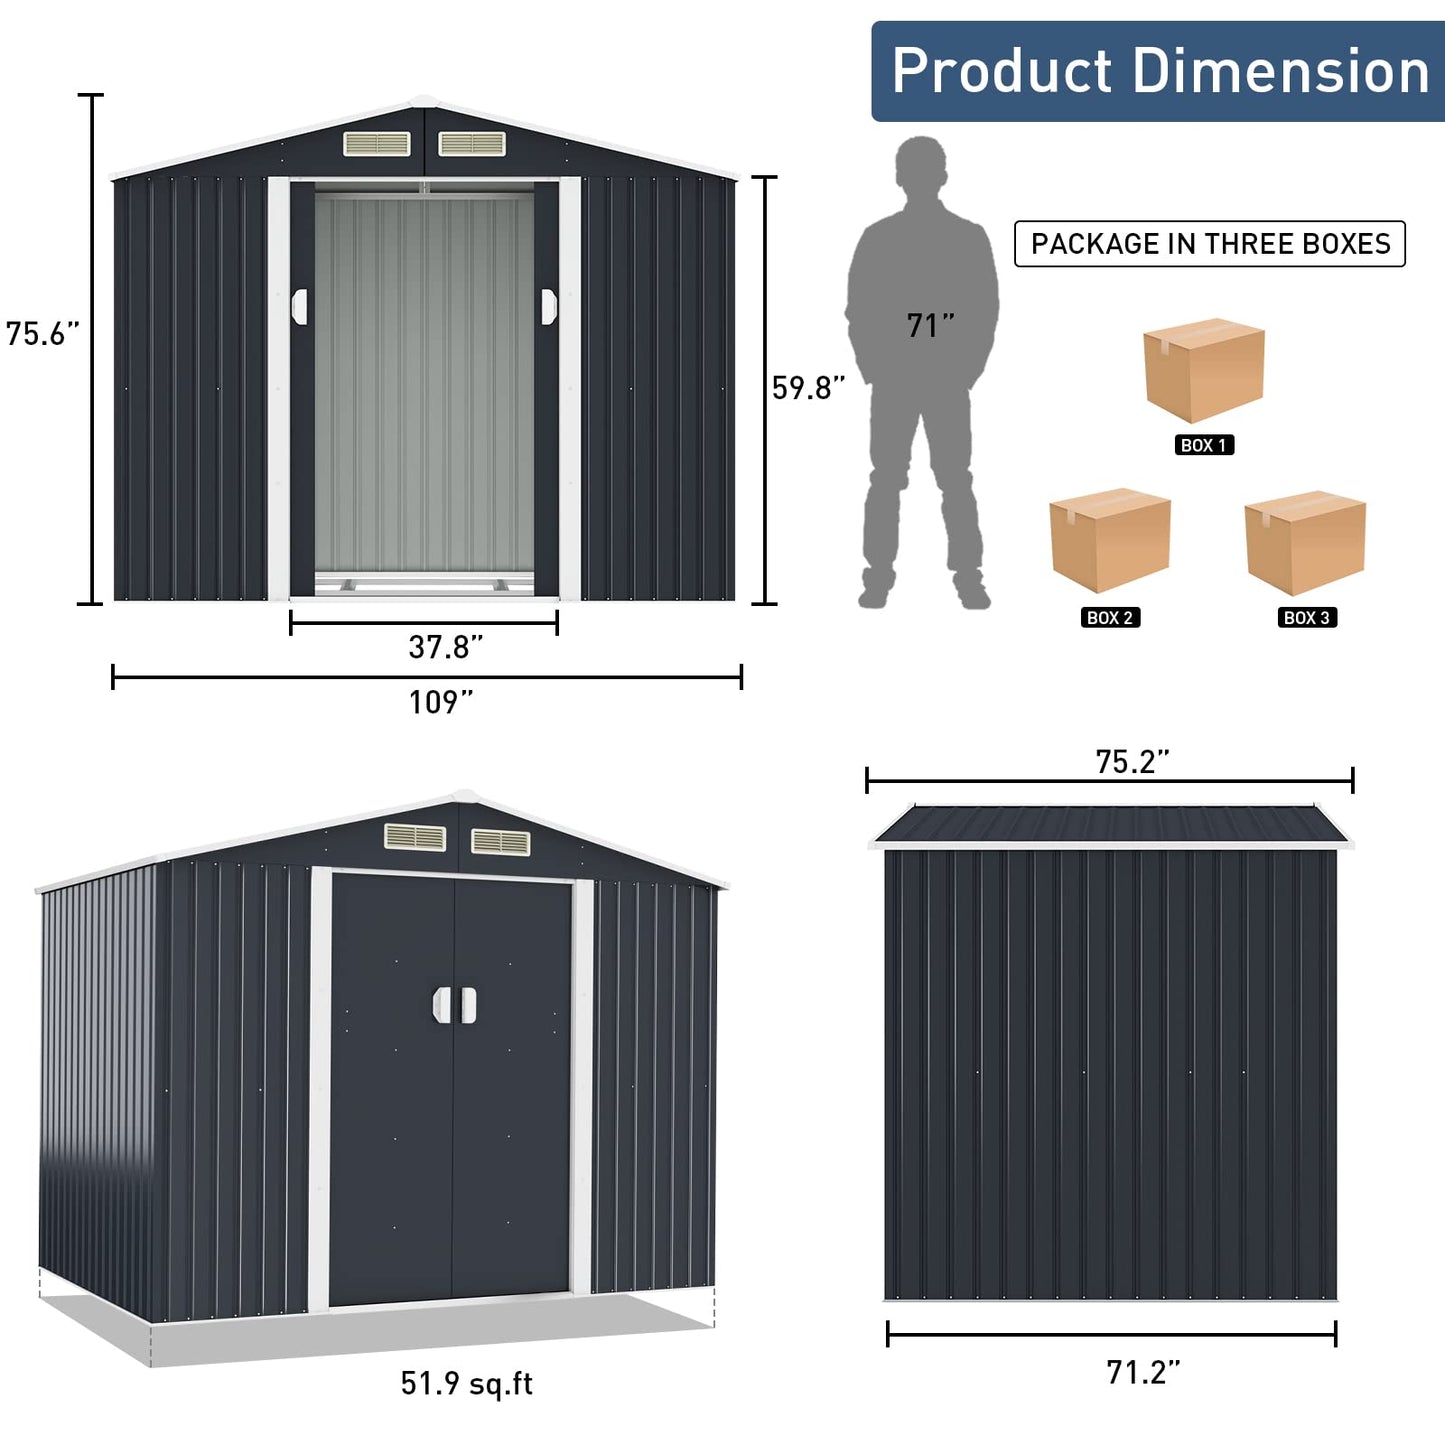 HOGYME 9.1' x 6.3' Storage Shed, Sheds & Outdoor Storage with Double Sliding/Lockable Door, Metal Tool Shed for Garden Backyard Patio Lawn, Gray 9x6